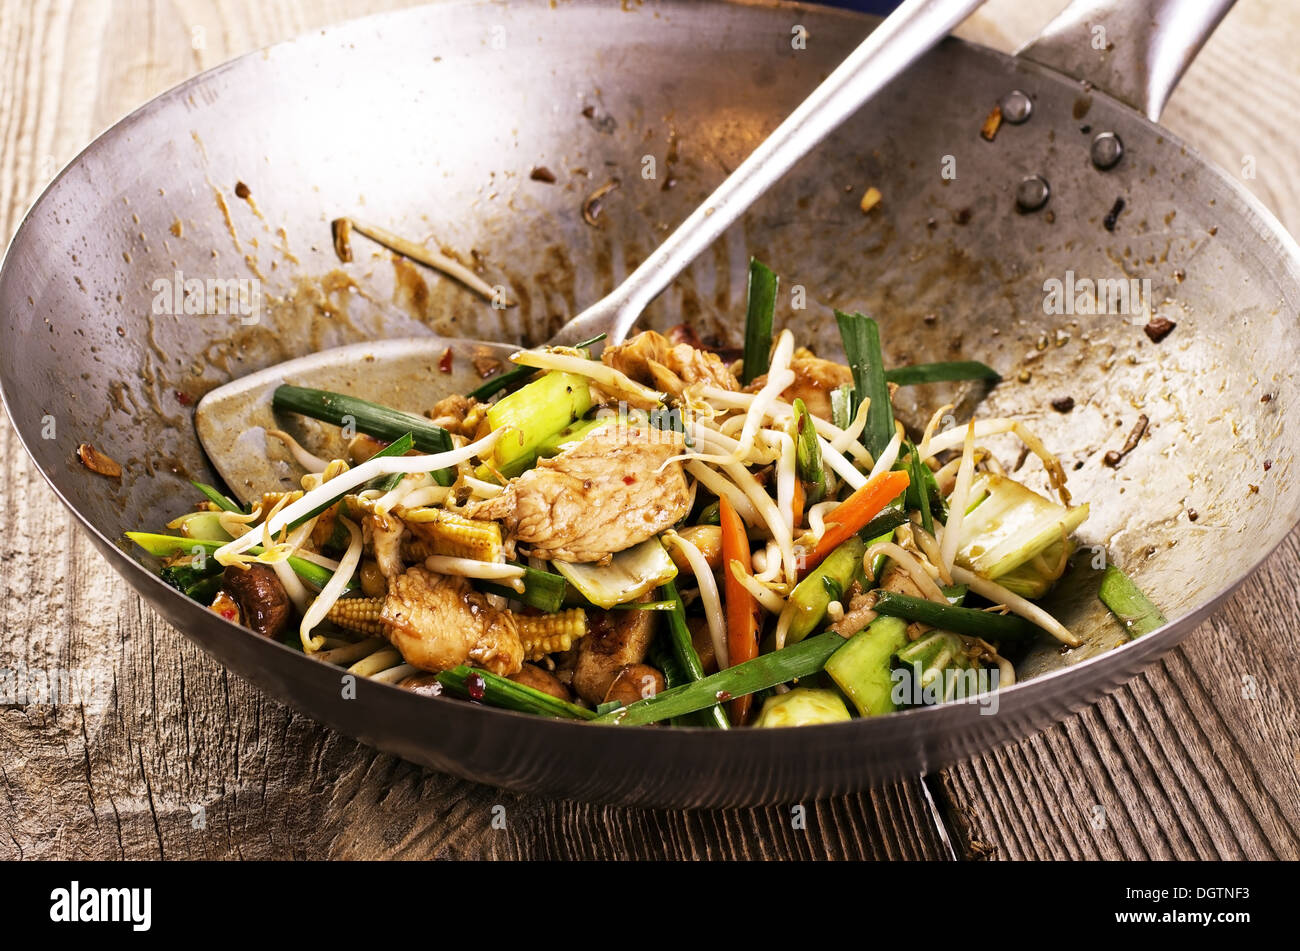 chicken with vegetable stir-fried in wok Stock Photo